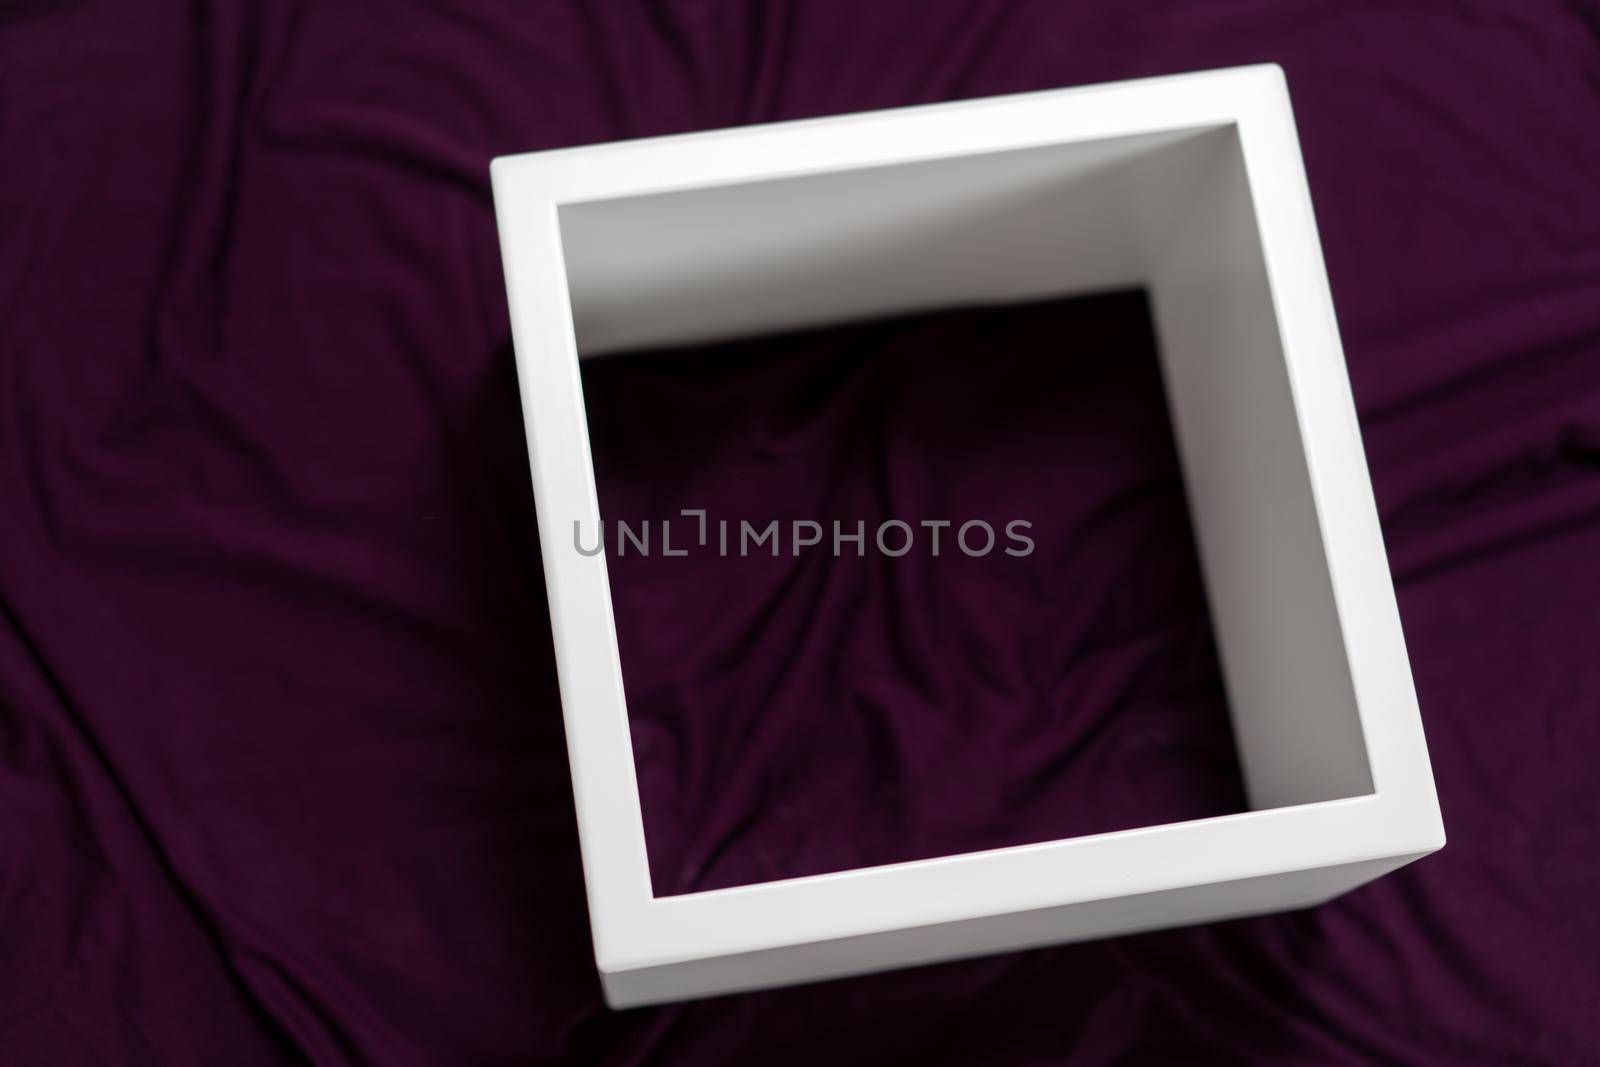 Simply design with empty blue frame isolated on pink and blue pastel colorful background. Top view, flat lay, copy space, mock up.